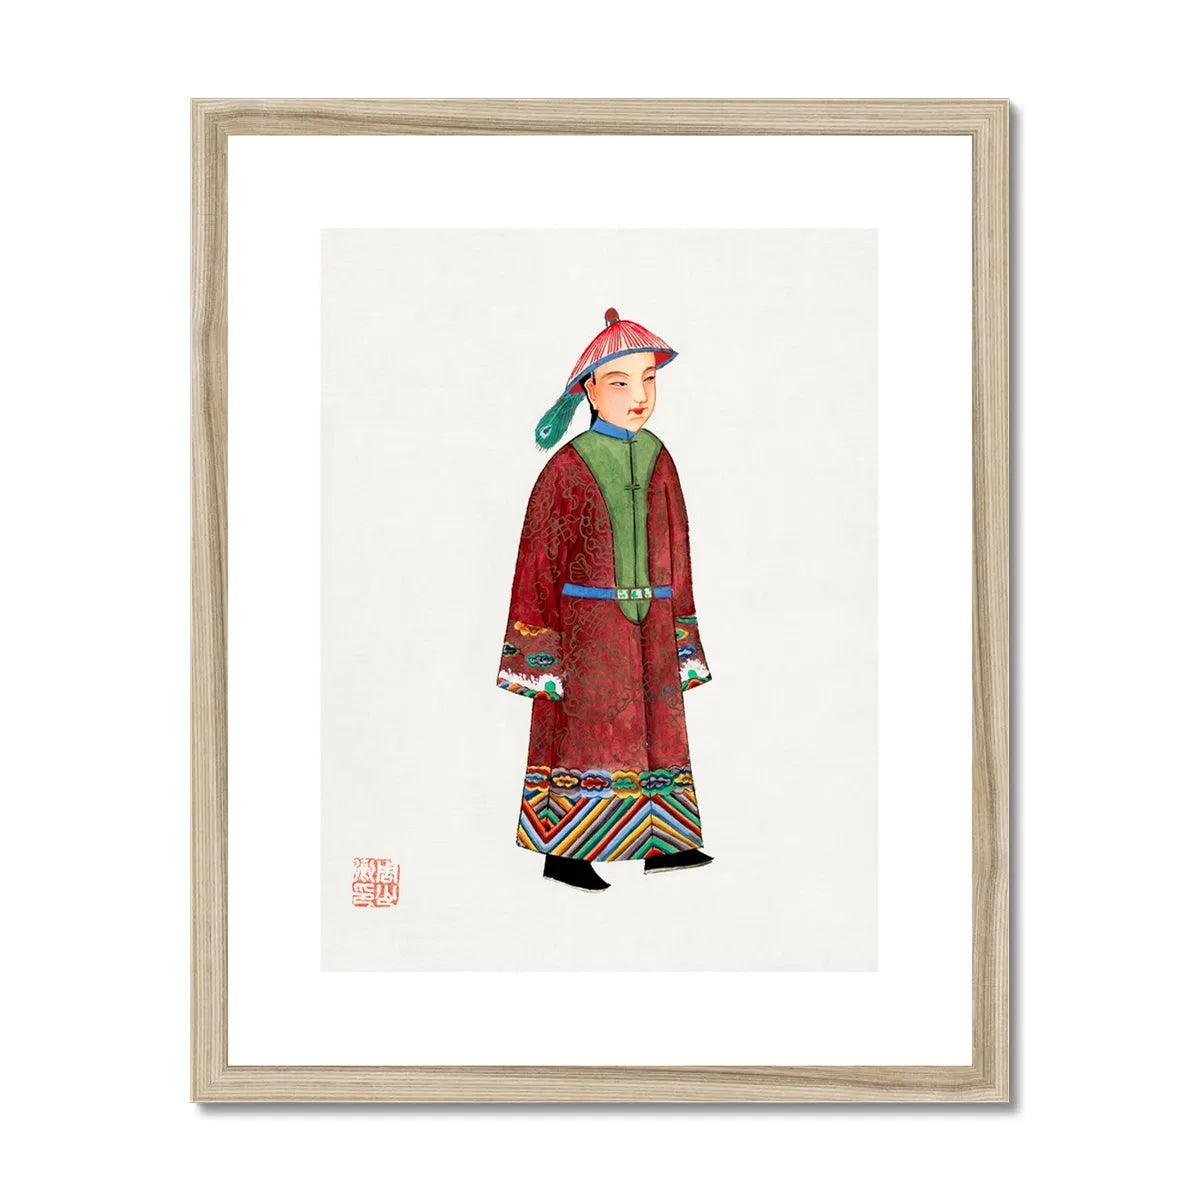 Chinese Dandy Framed & Mounted Print - 16’x20’ / Natural Frame - Posters Prints & Visual Artwork - Aesthetic Art